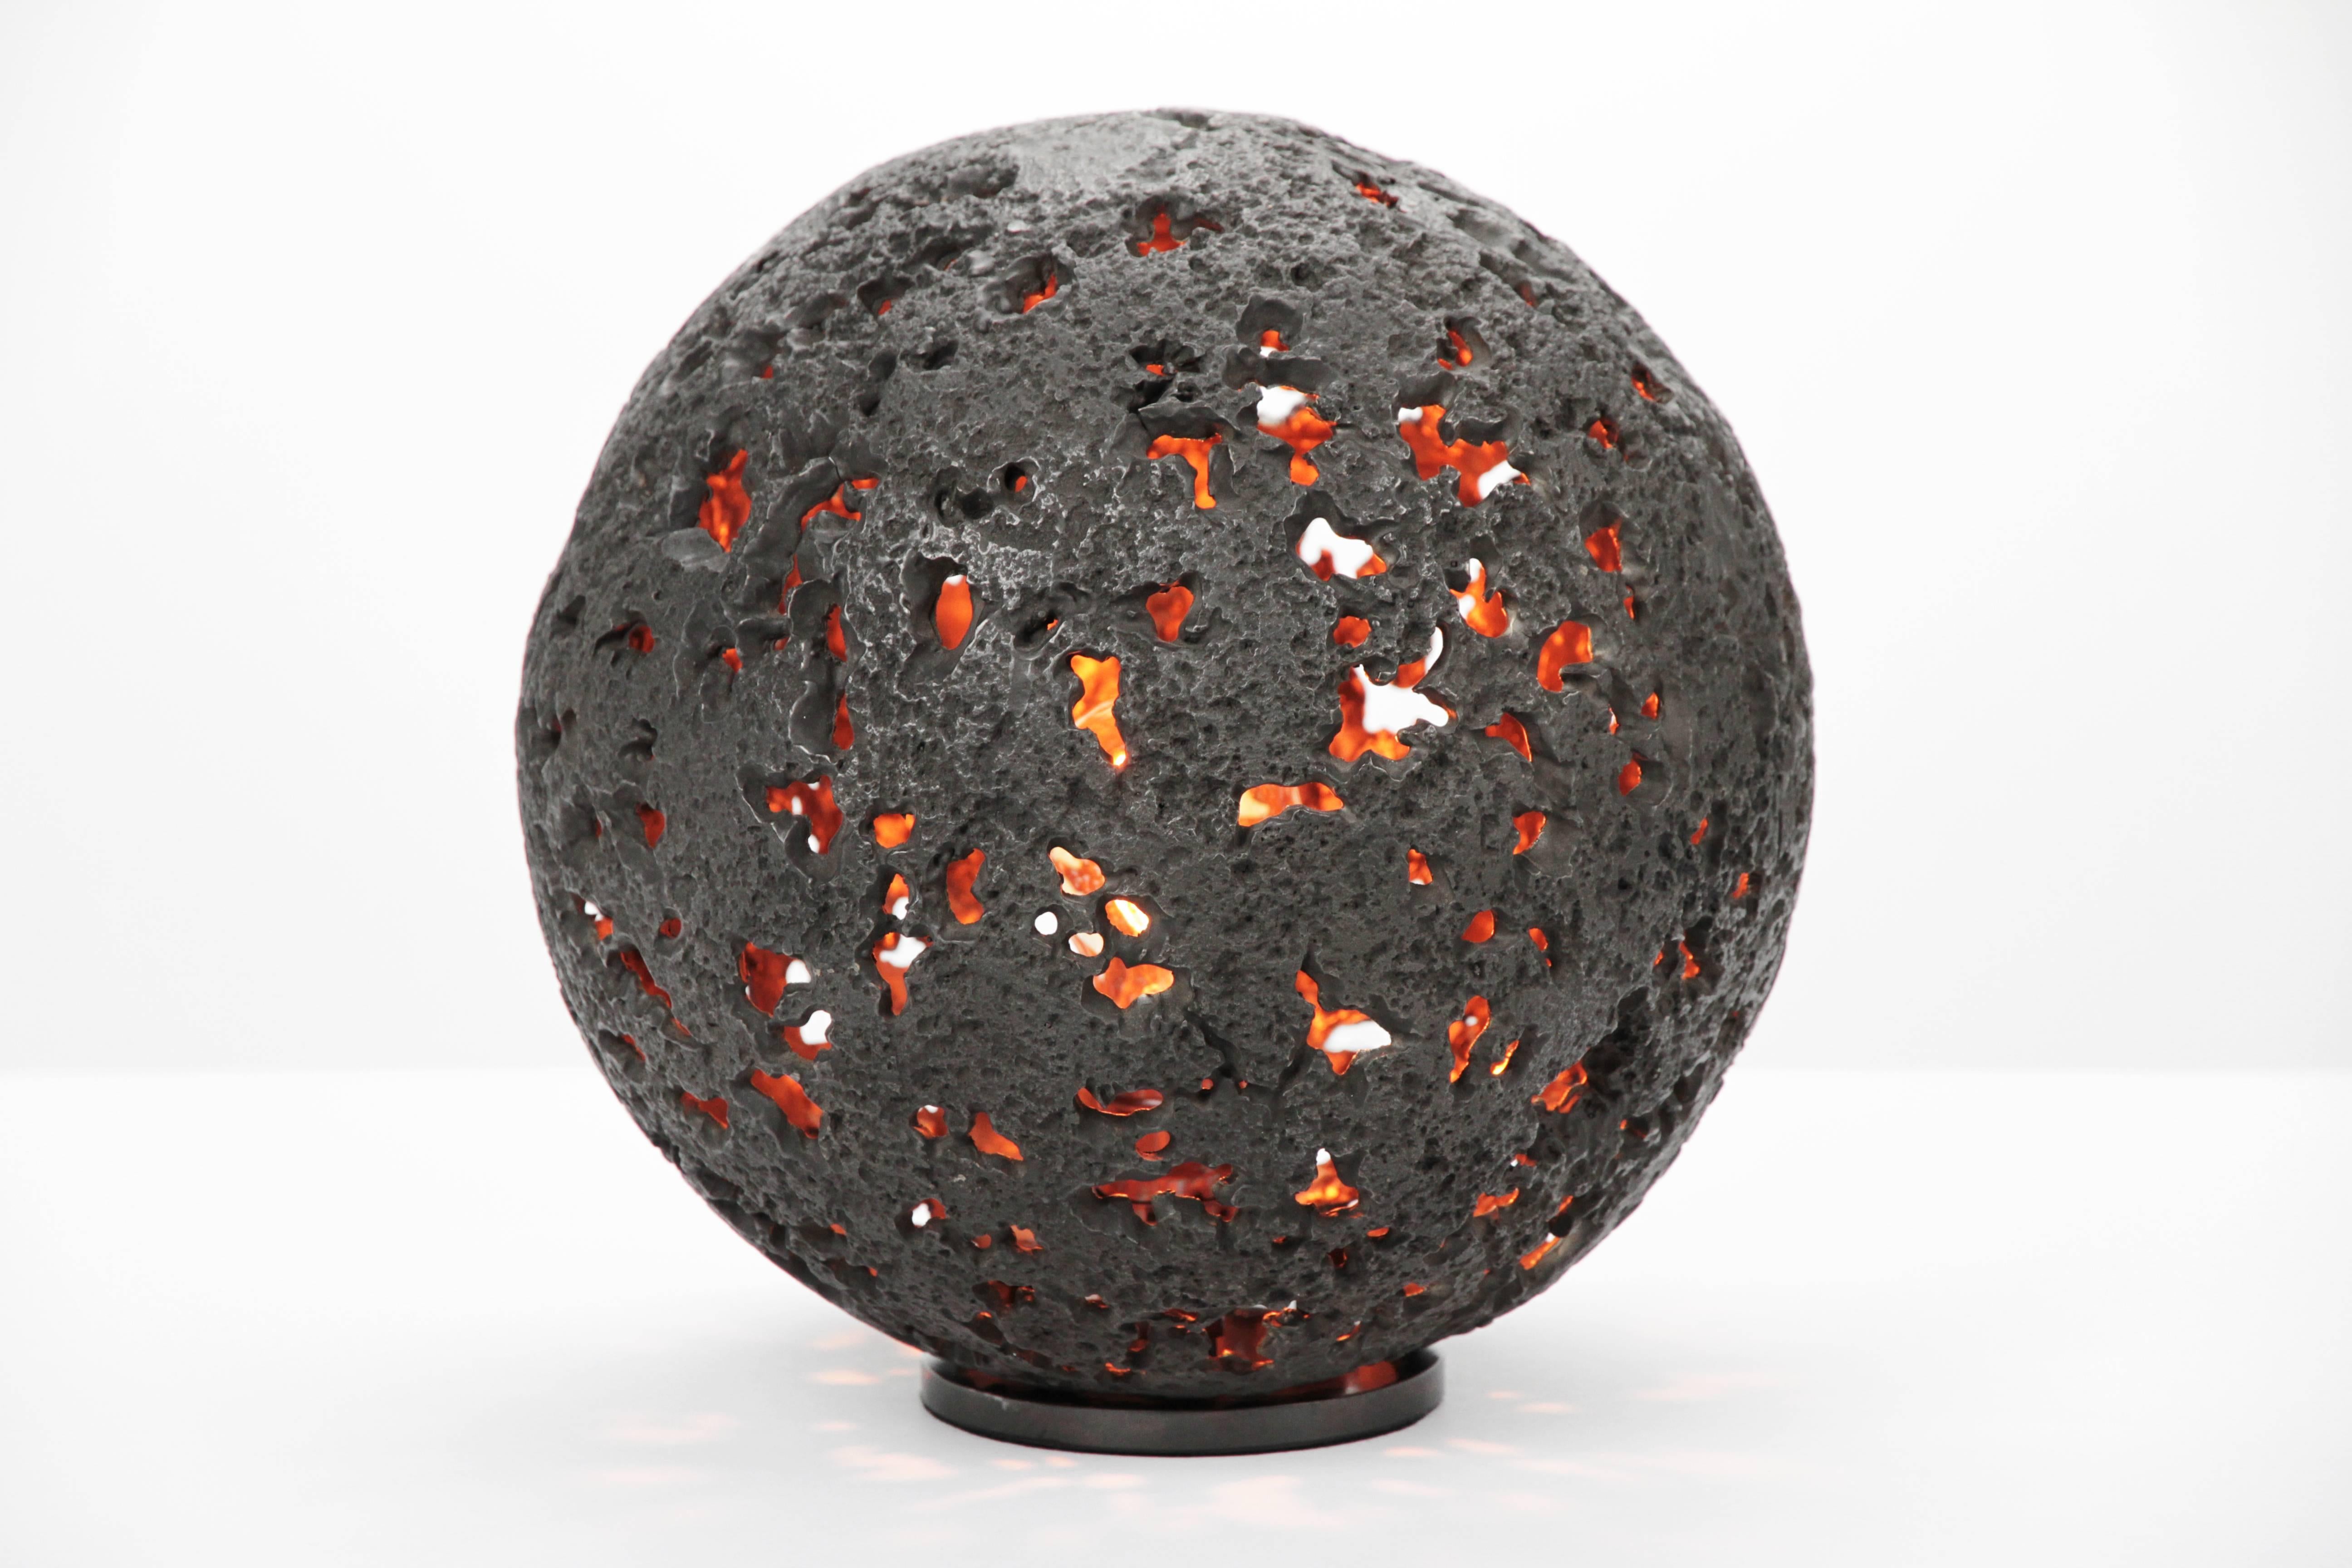 The Hot Planet Table Lamp is a sphere full of craters with a light source at the center symbolizing the core of energy within a planet.  The body is cast in bronze with a blackened patina. The patina brings out the texture in the sculpture.  The raw